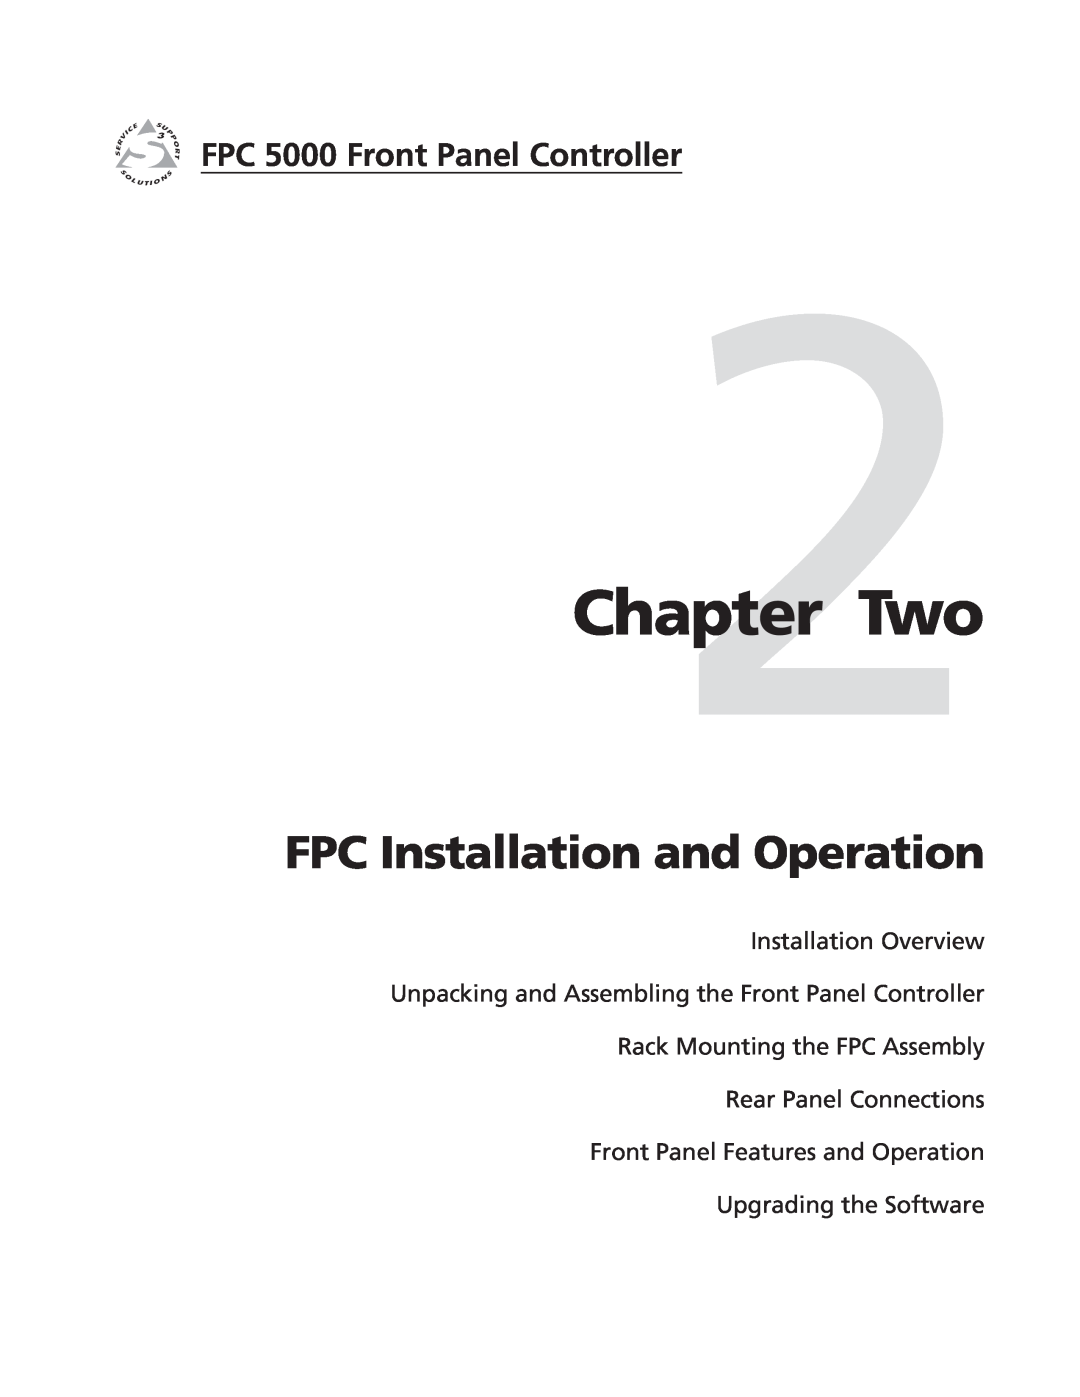 Extron electronic manual Two, FPC Installation and Operation, Installation Overview, FPC 5000 Front Panel Controller 